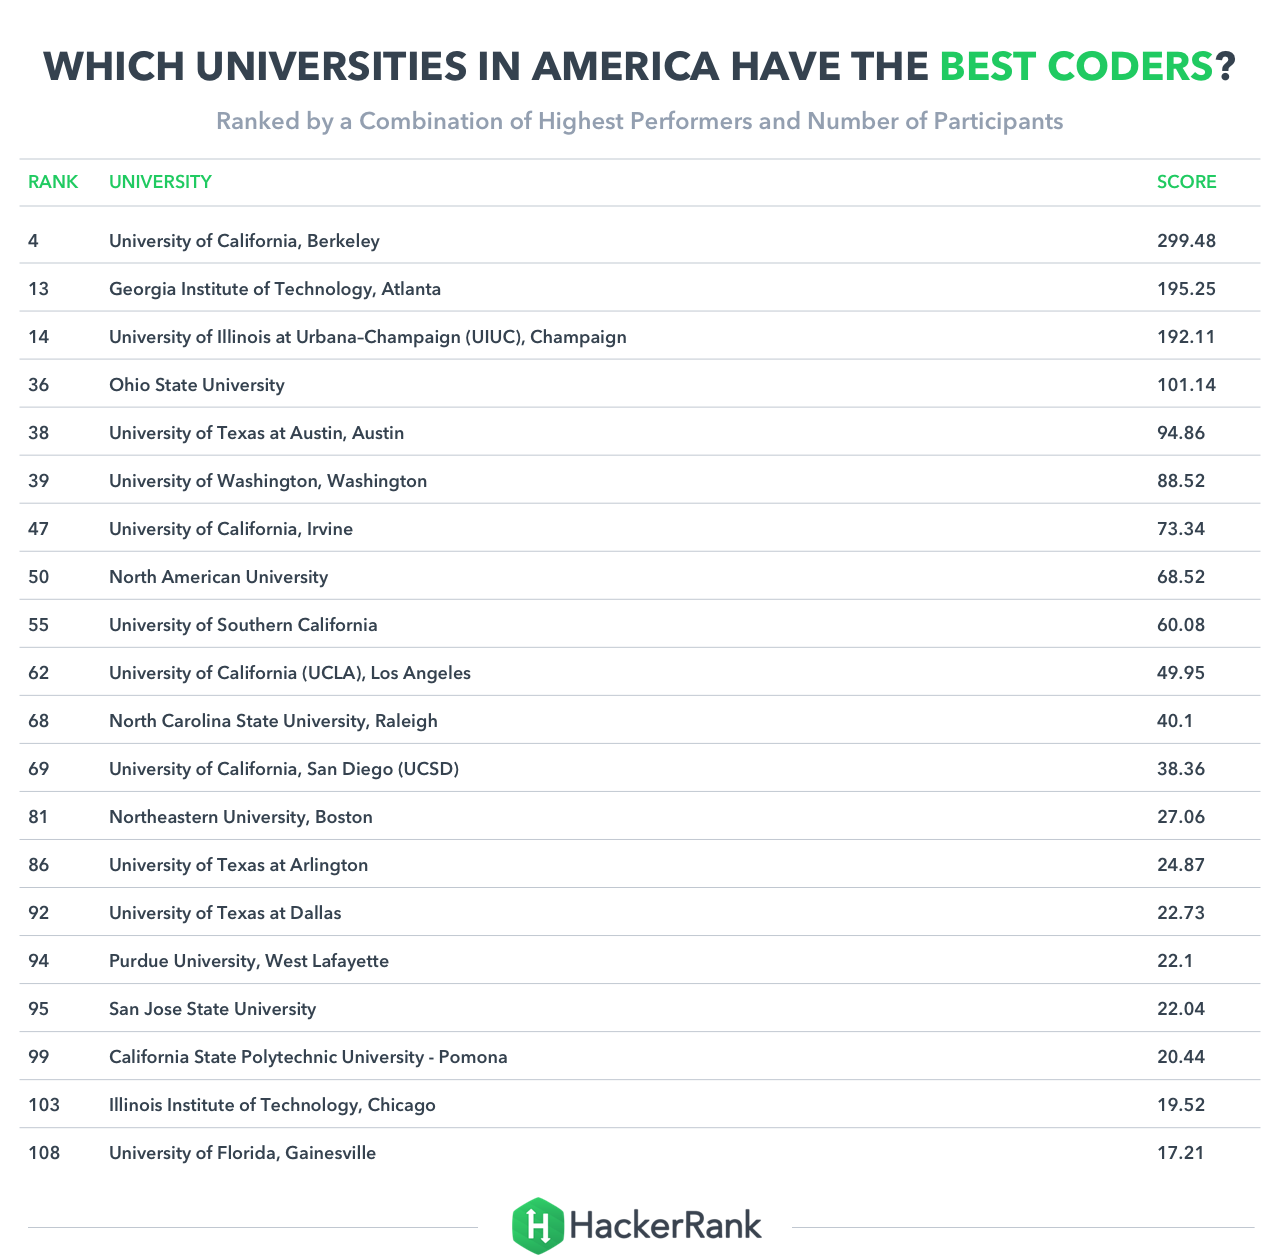 American universities with the best coders